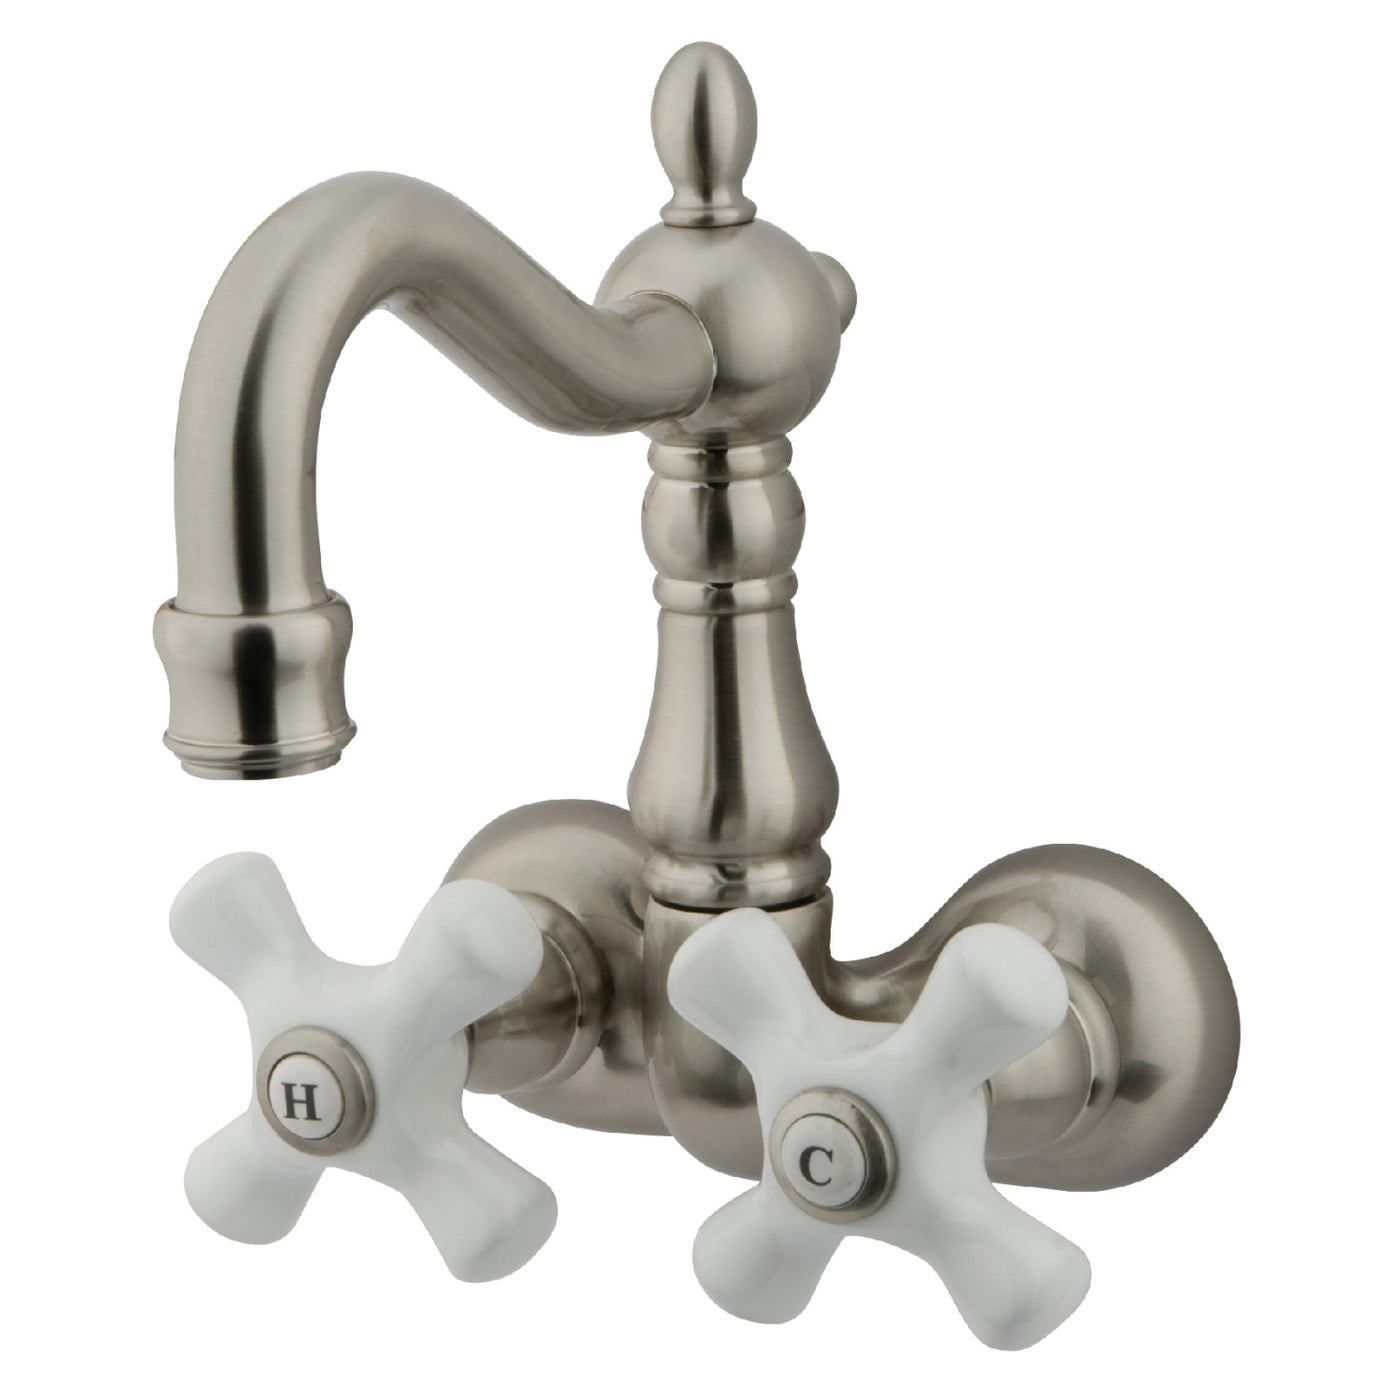 Elements of Design DT10718PX 3-3/8-Inch Wall Mount Tub Faucet, Brushed Nickel